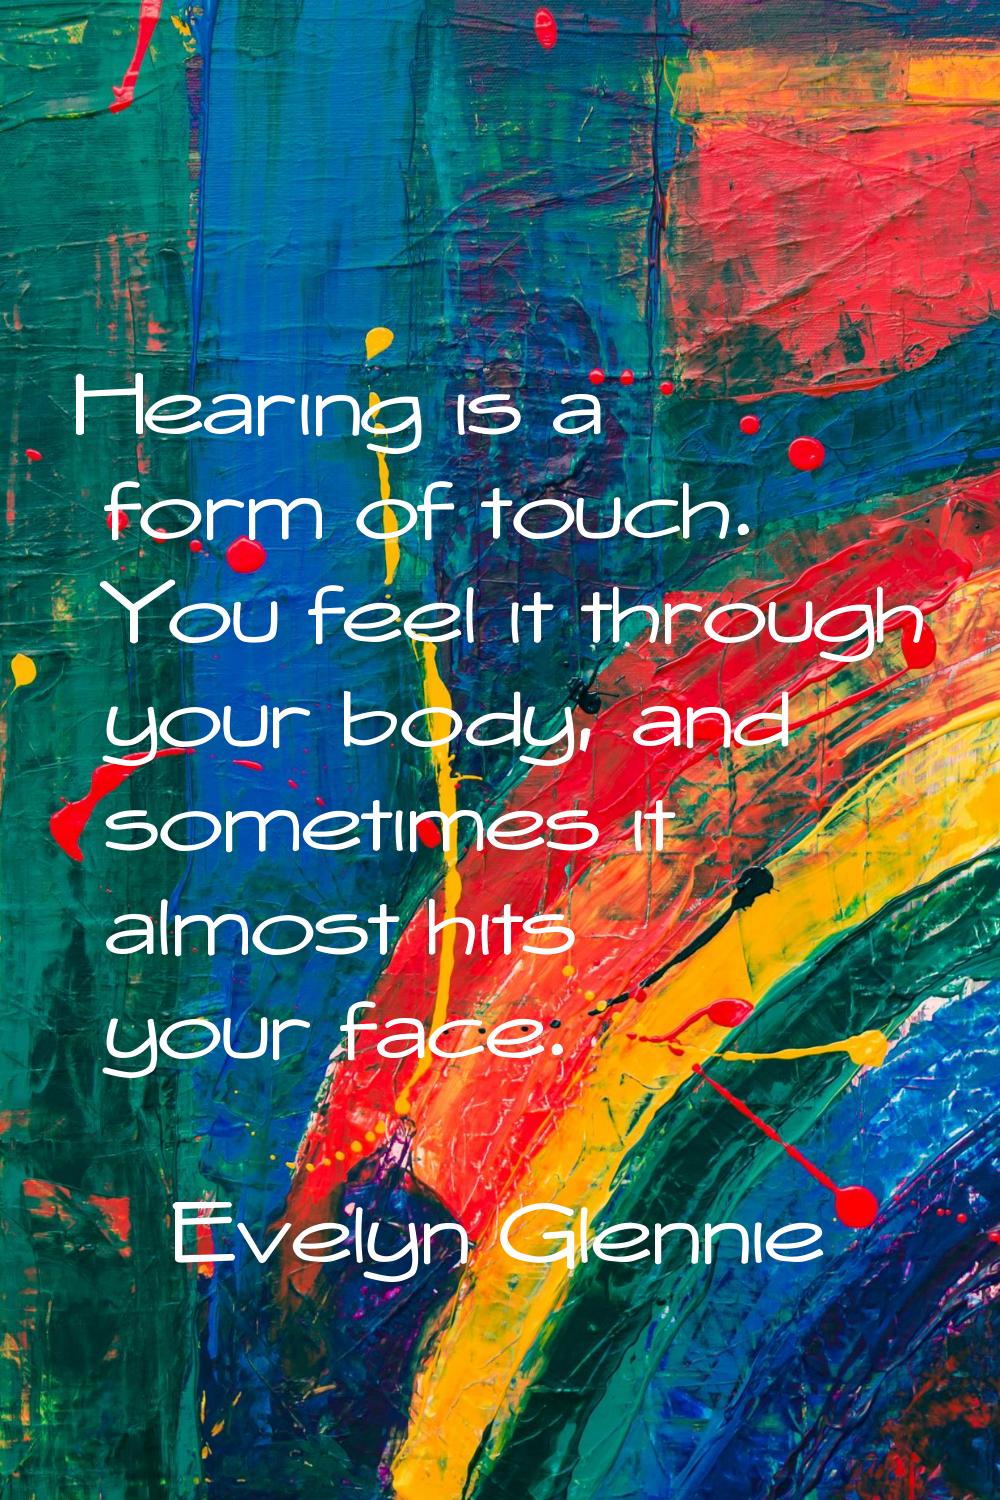 Hearing is a form of touch. You feel it through your body, and sometimes it almost hits your face.